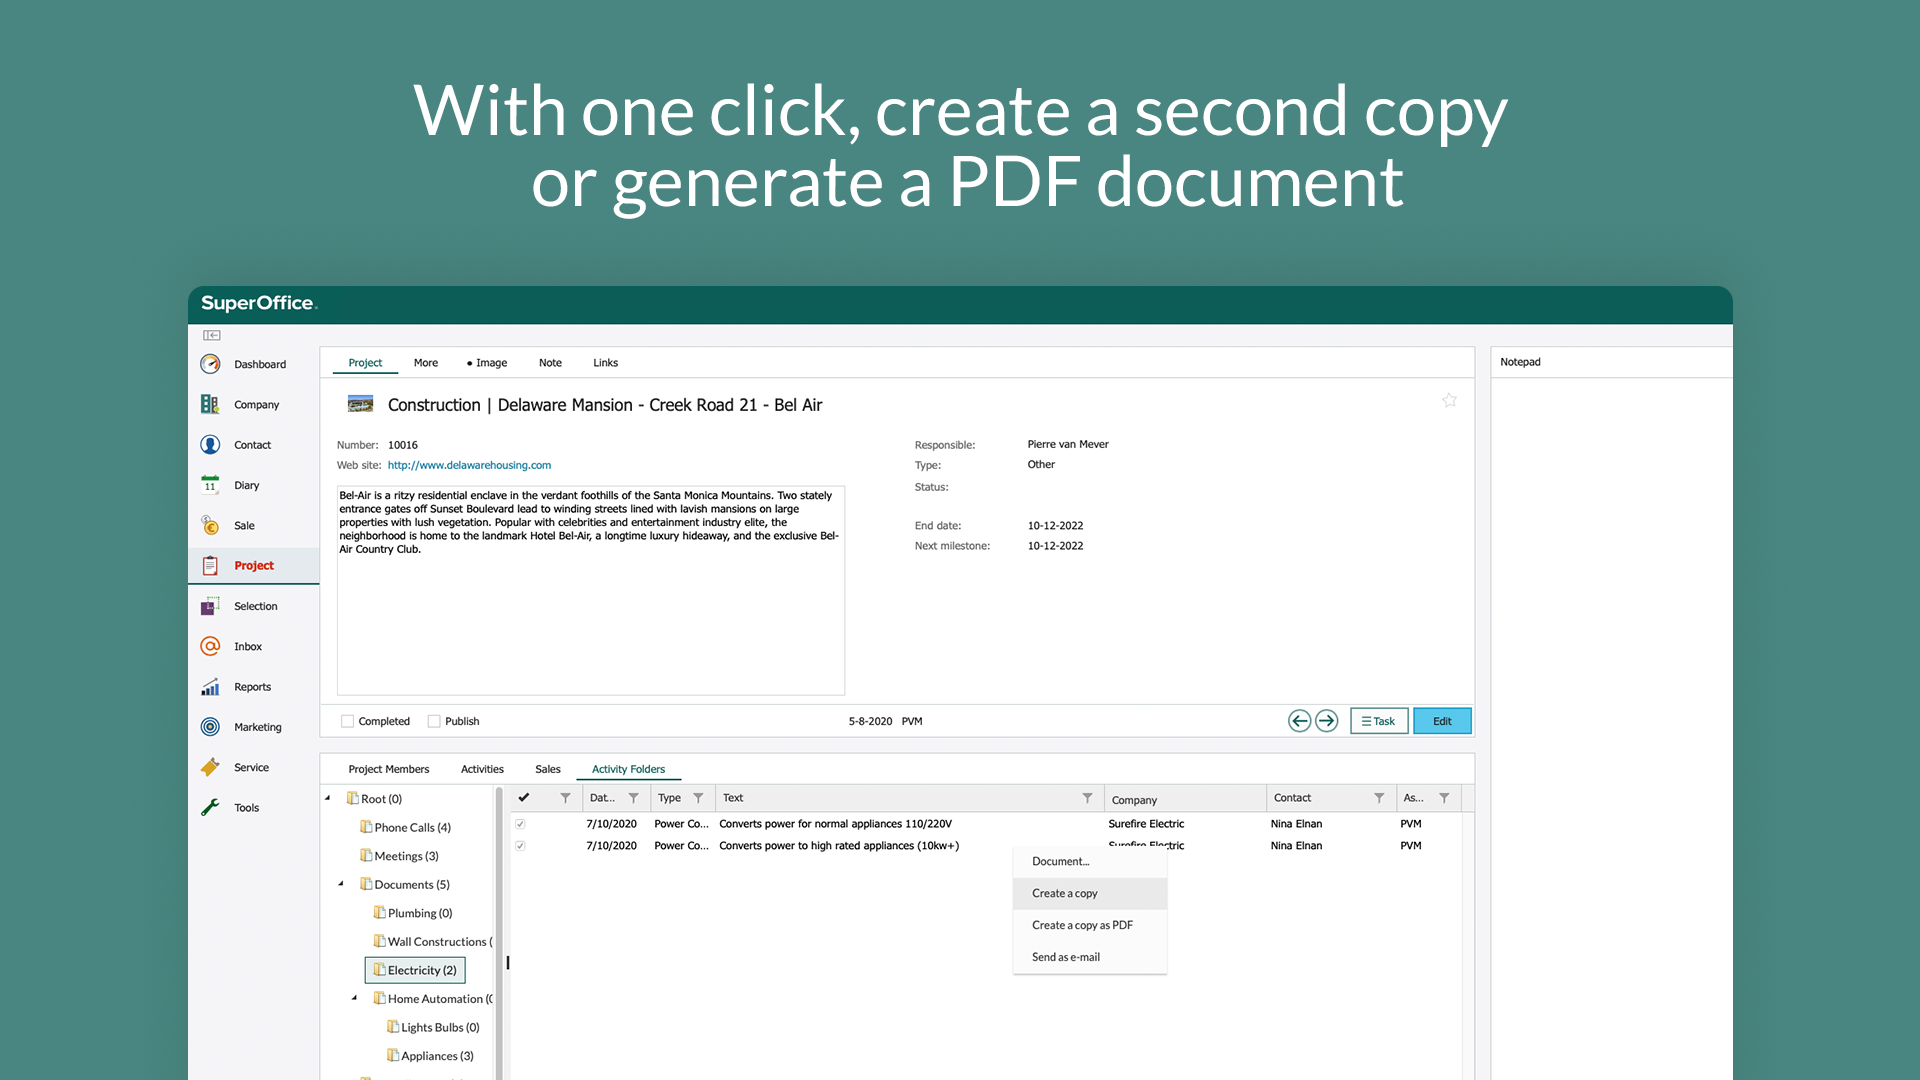 With one click, create a second copy or generate a PDF document